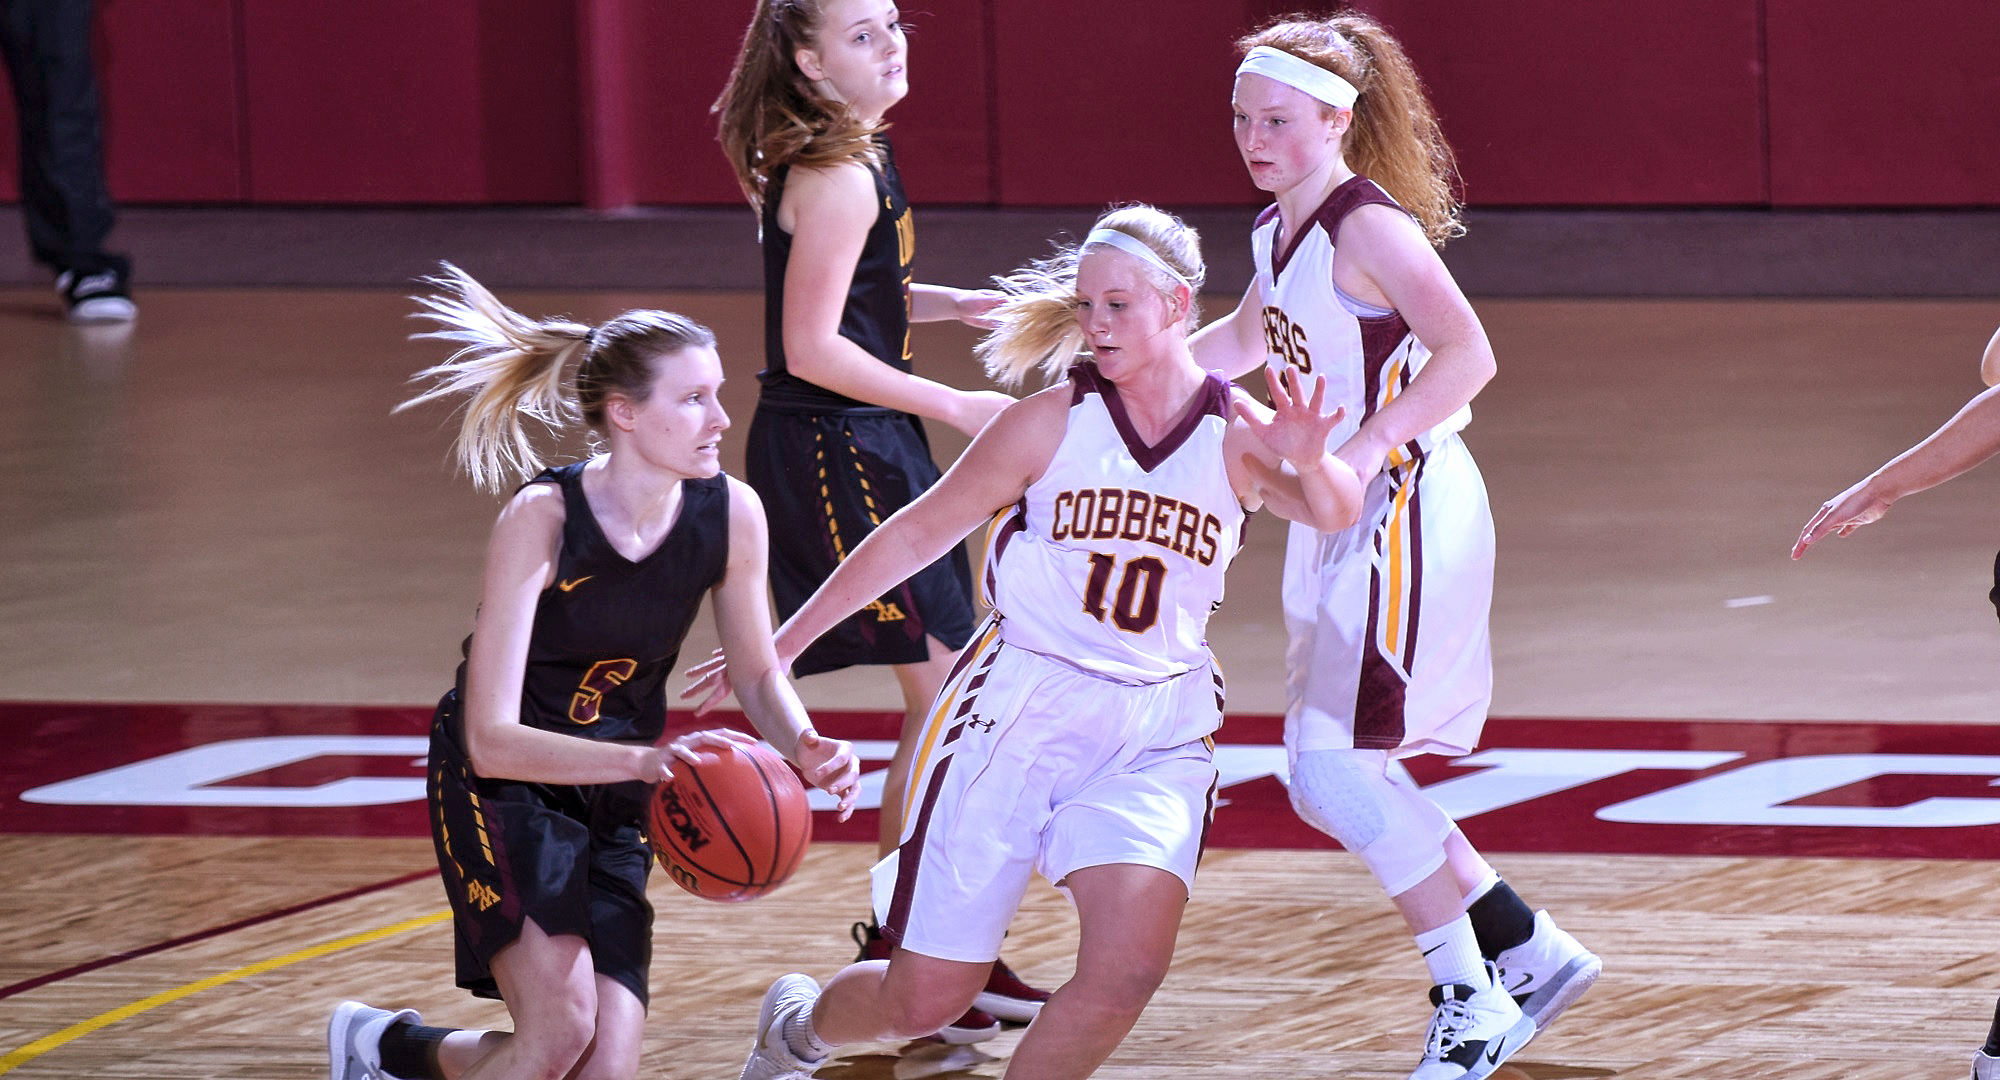 Concordia lost 96-58 in the first game of the Simpson Thanksgiving Classic tournament.